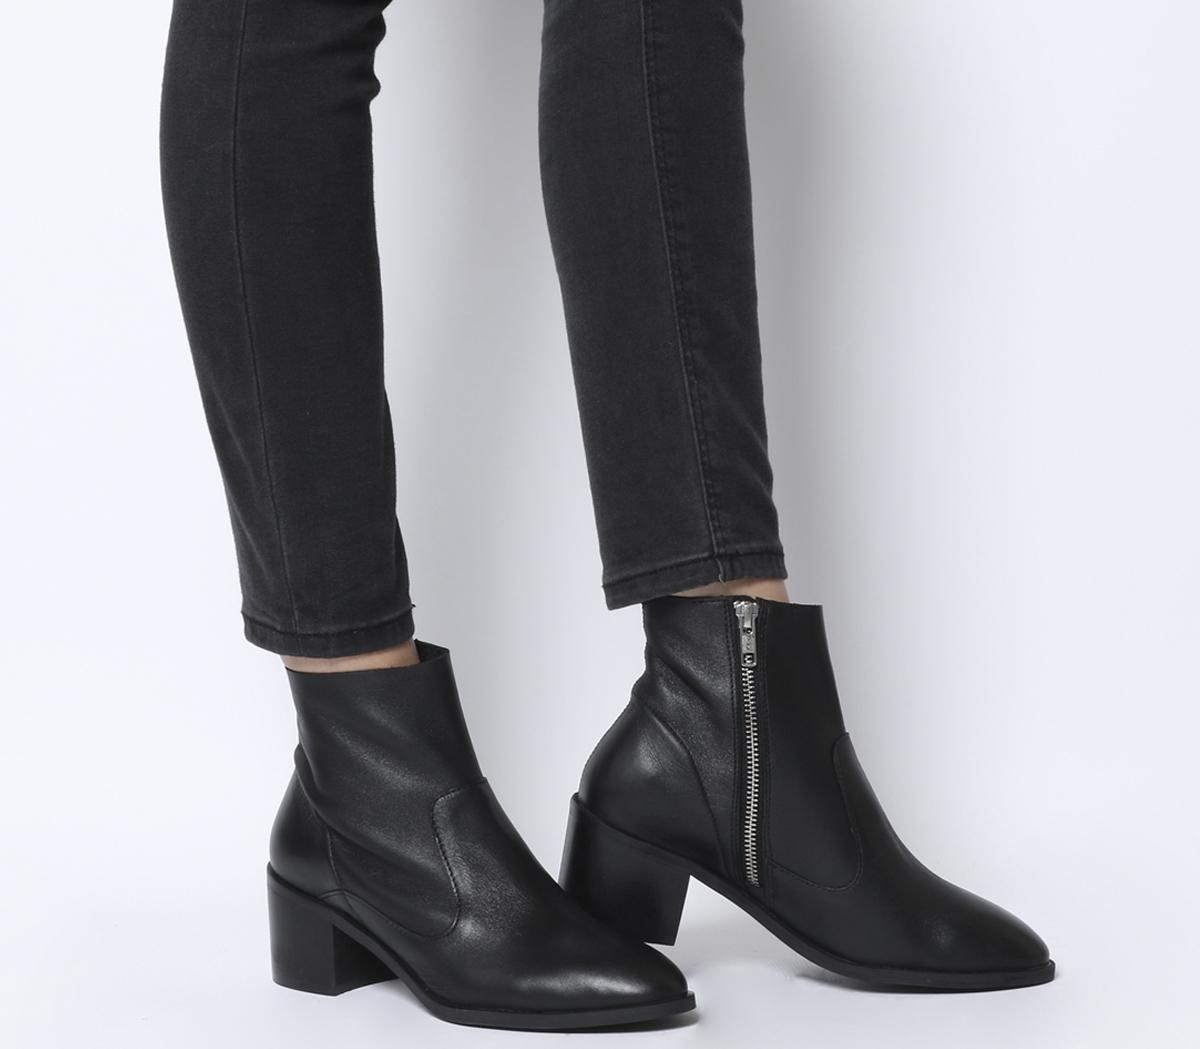 OFFICE Alford Unlined Block Heel Boots Black Leather - Women's Boots